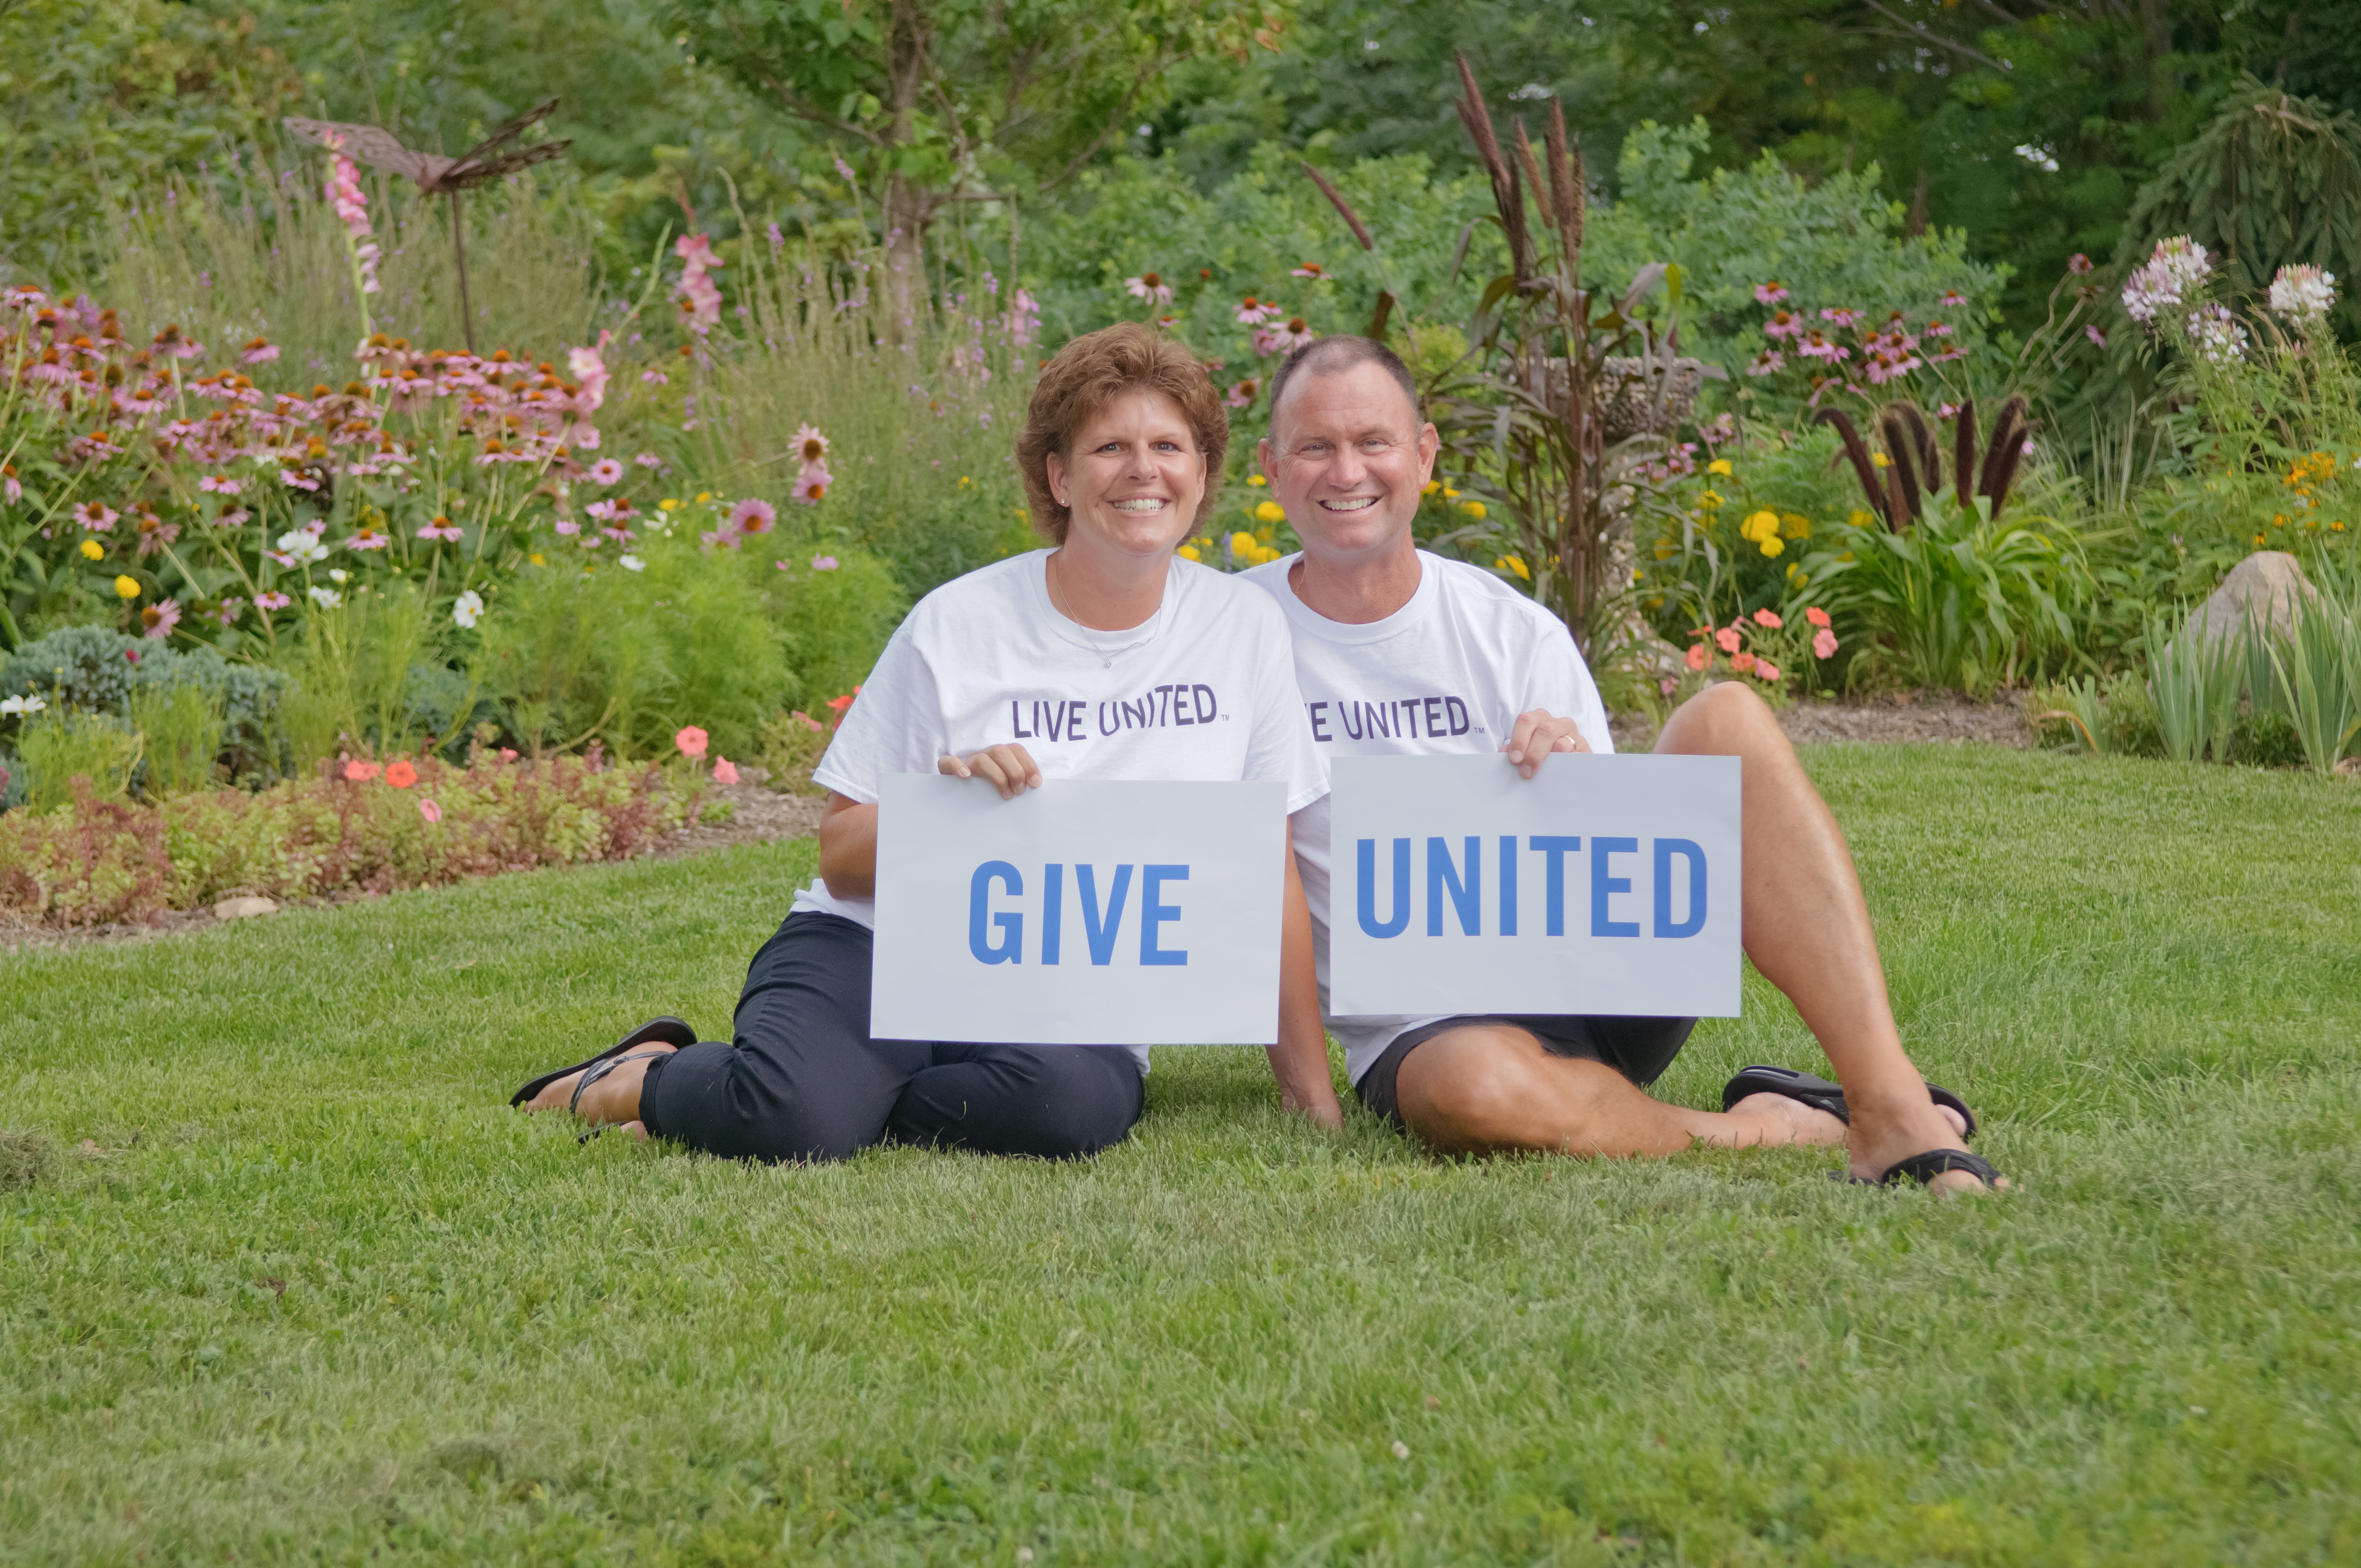 UNITED WAY CAMPAIGN KICK OFF & DAY OF CARING! 9.14.16